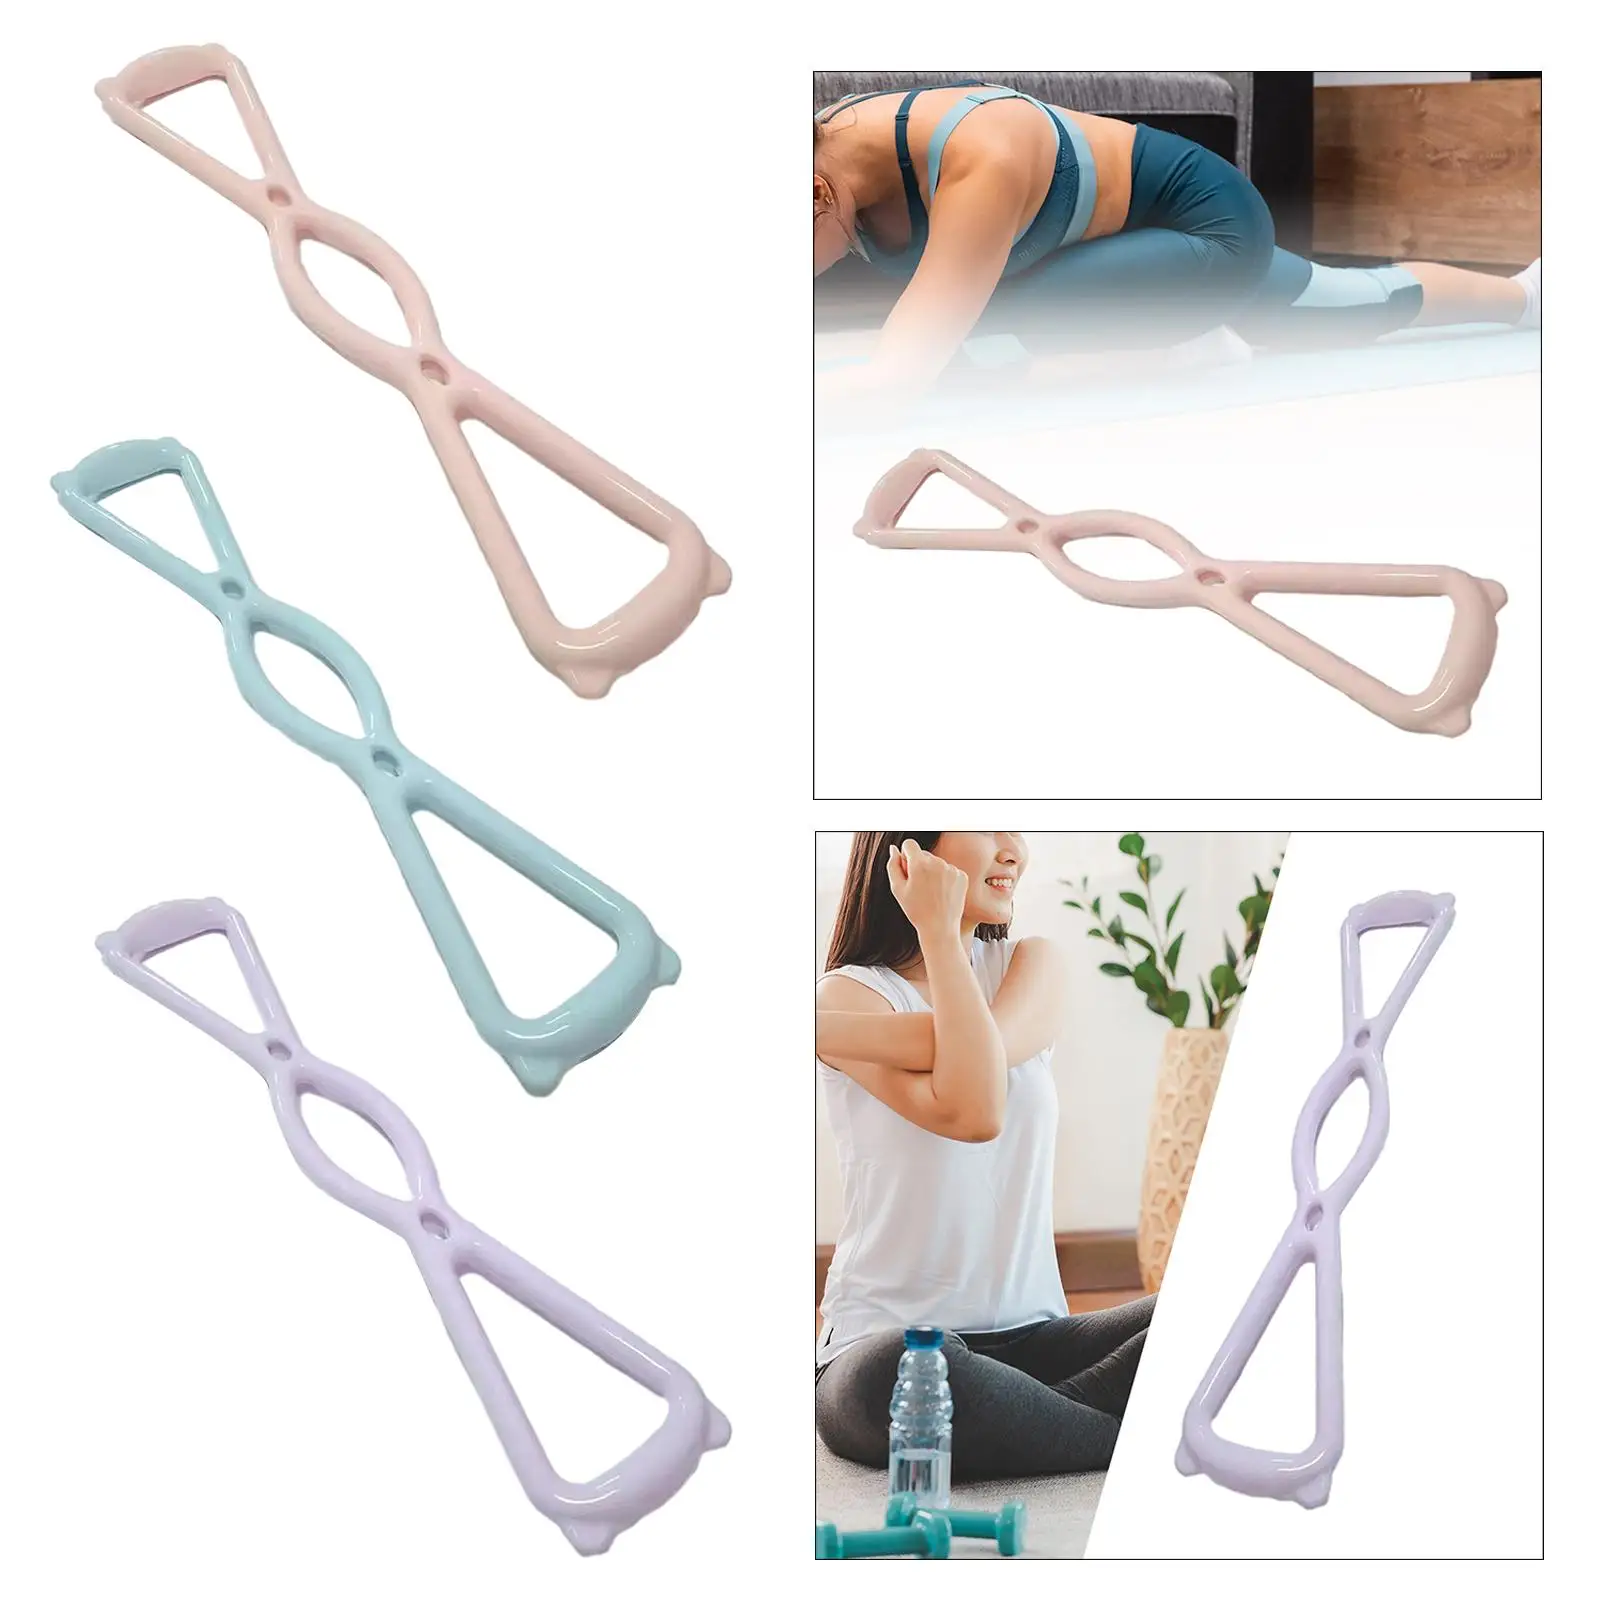 8 Shaped Resistance Band Rally Strap Stretching Pull Rope Exercise Band for Exercising Pilates Women Men Trainer Muscle Building